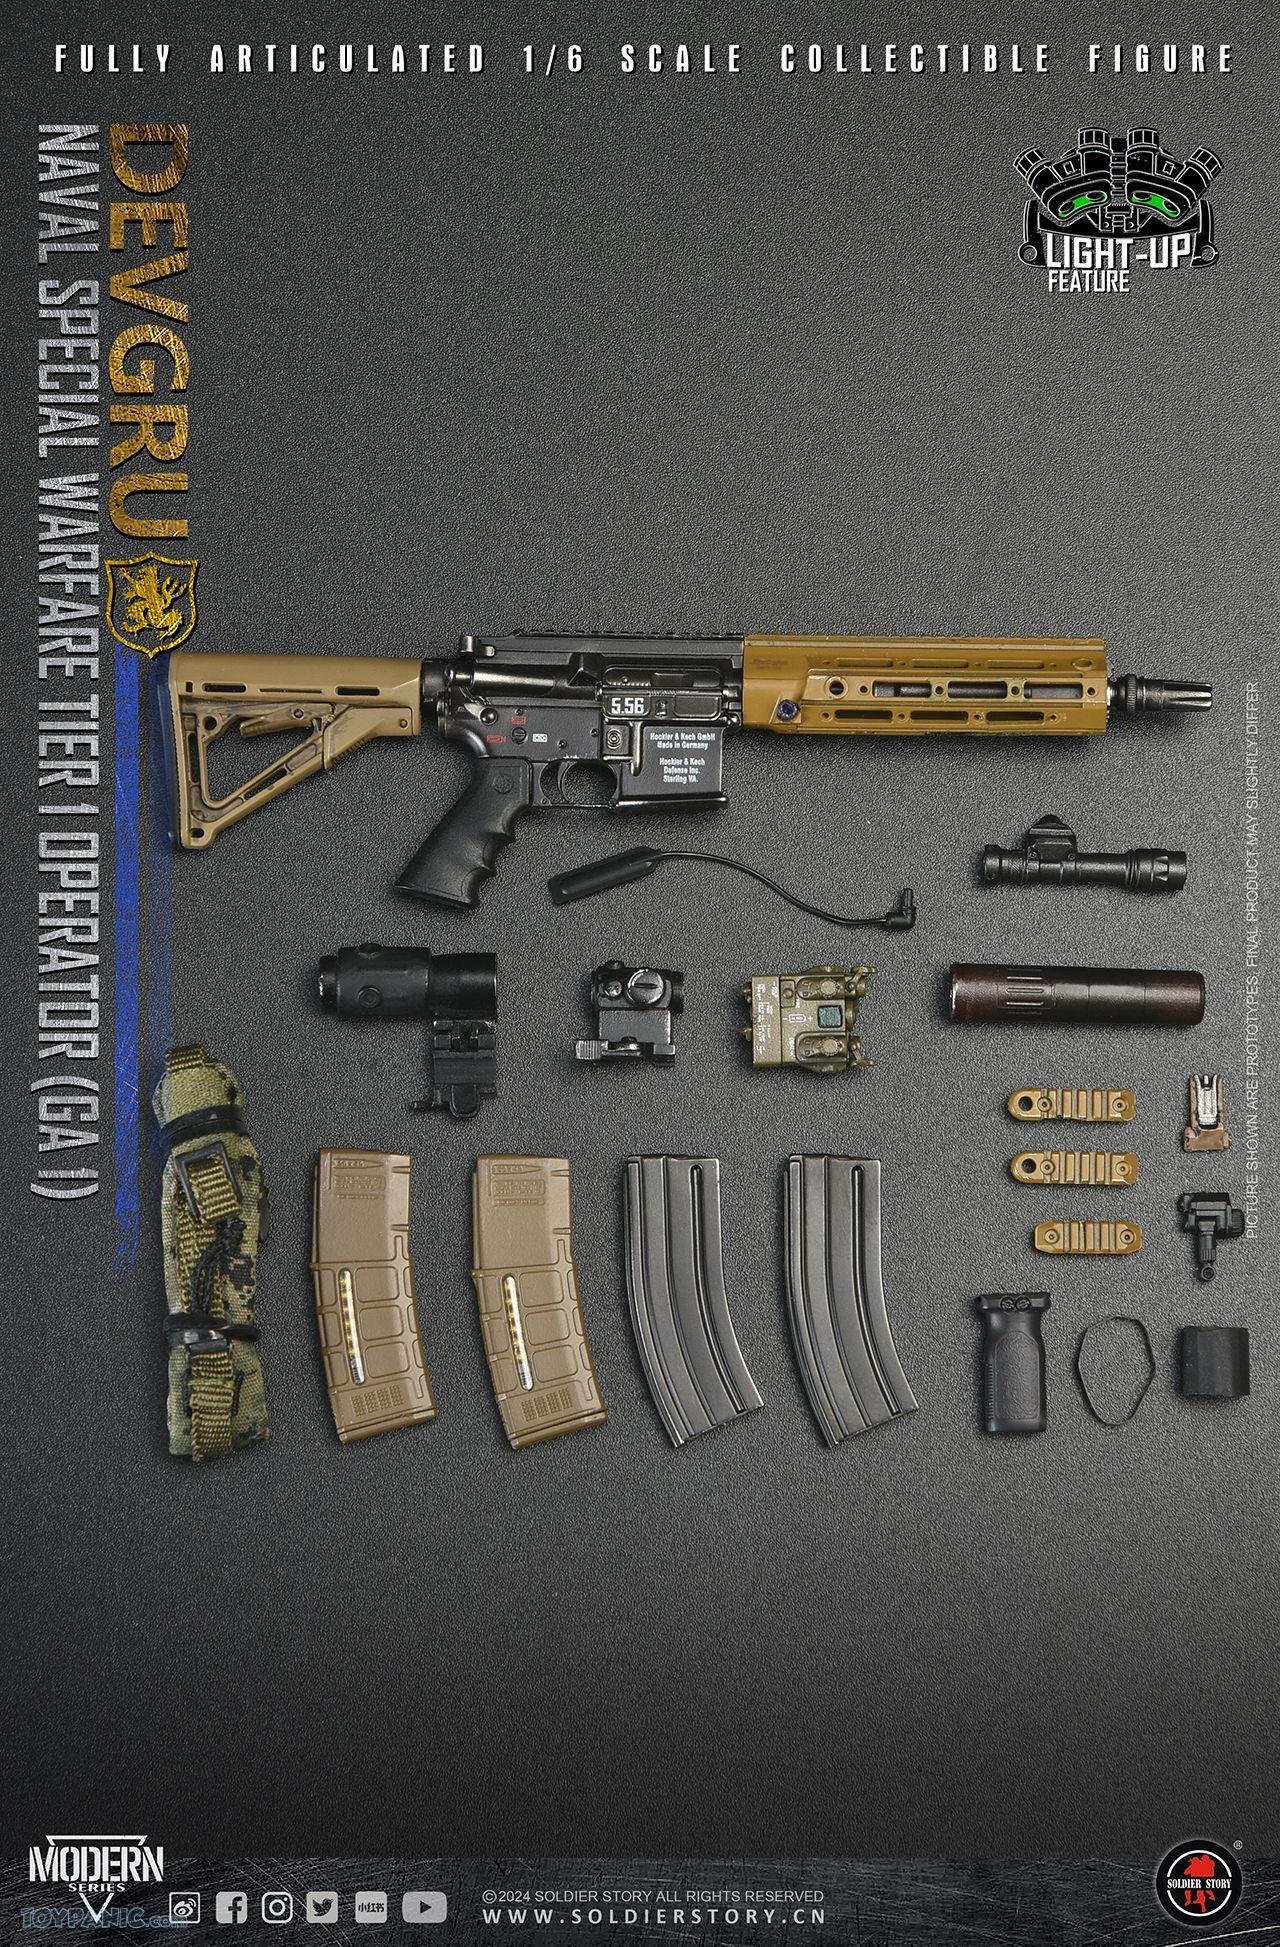 military - NEW PRODUCT: 1/6 Scale Naval Special Warfare Tier 1 Team Leader GA-1 Collectible Action Figure (SS135B) From Soldier Story  2732024104003AM_7670998